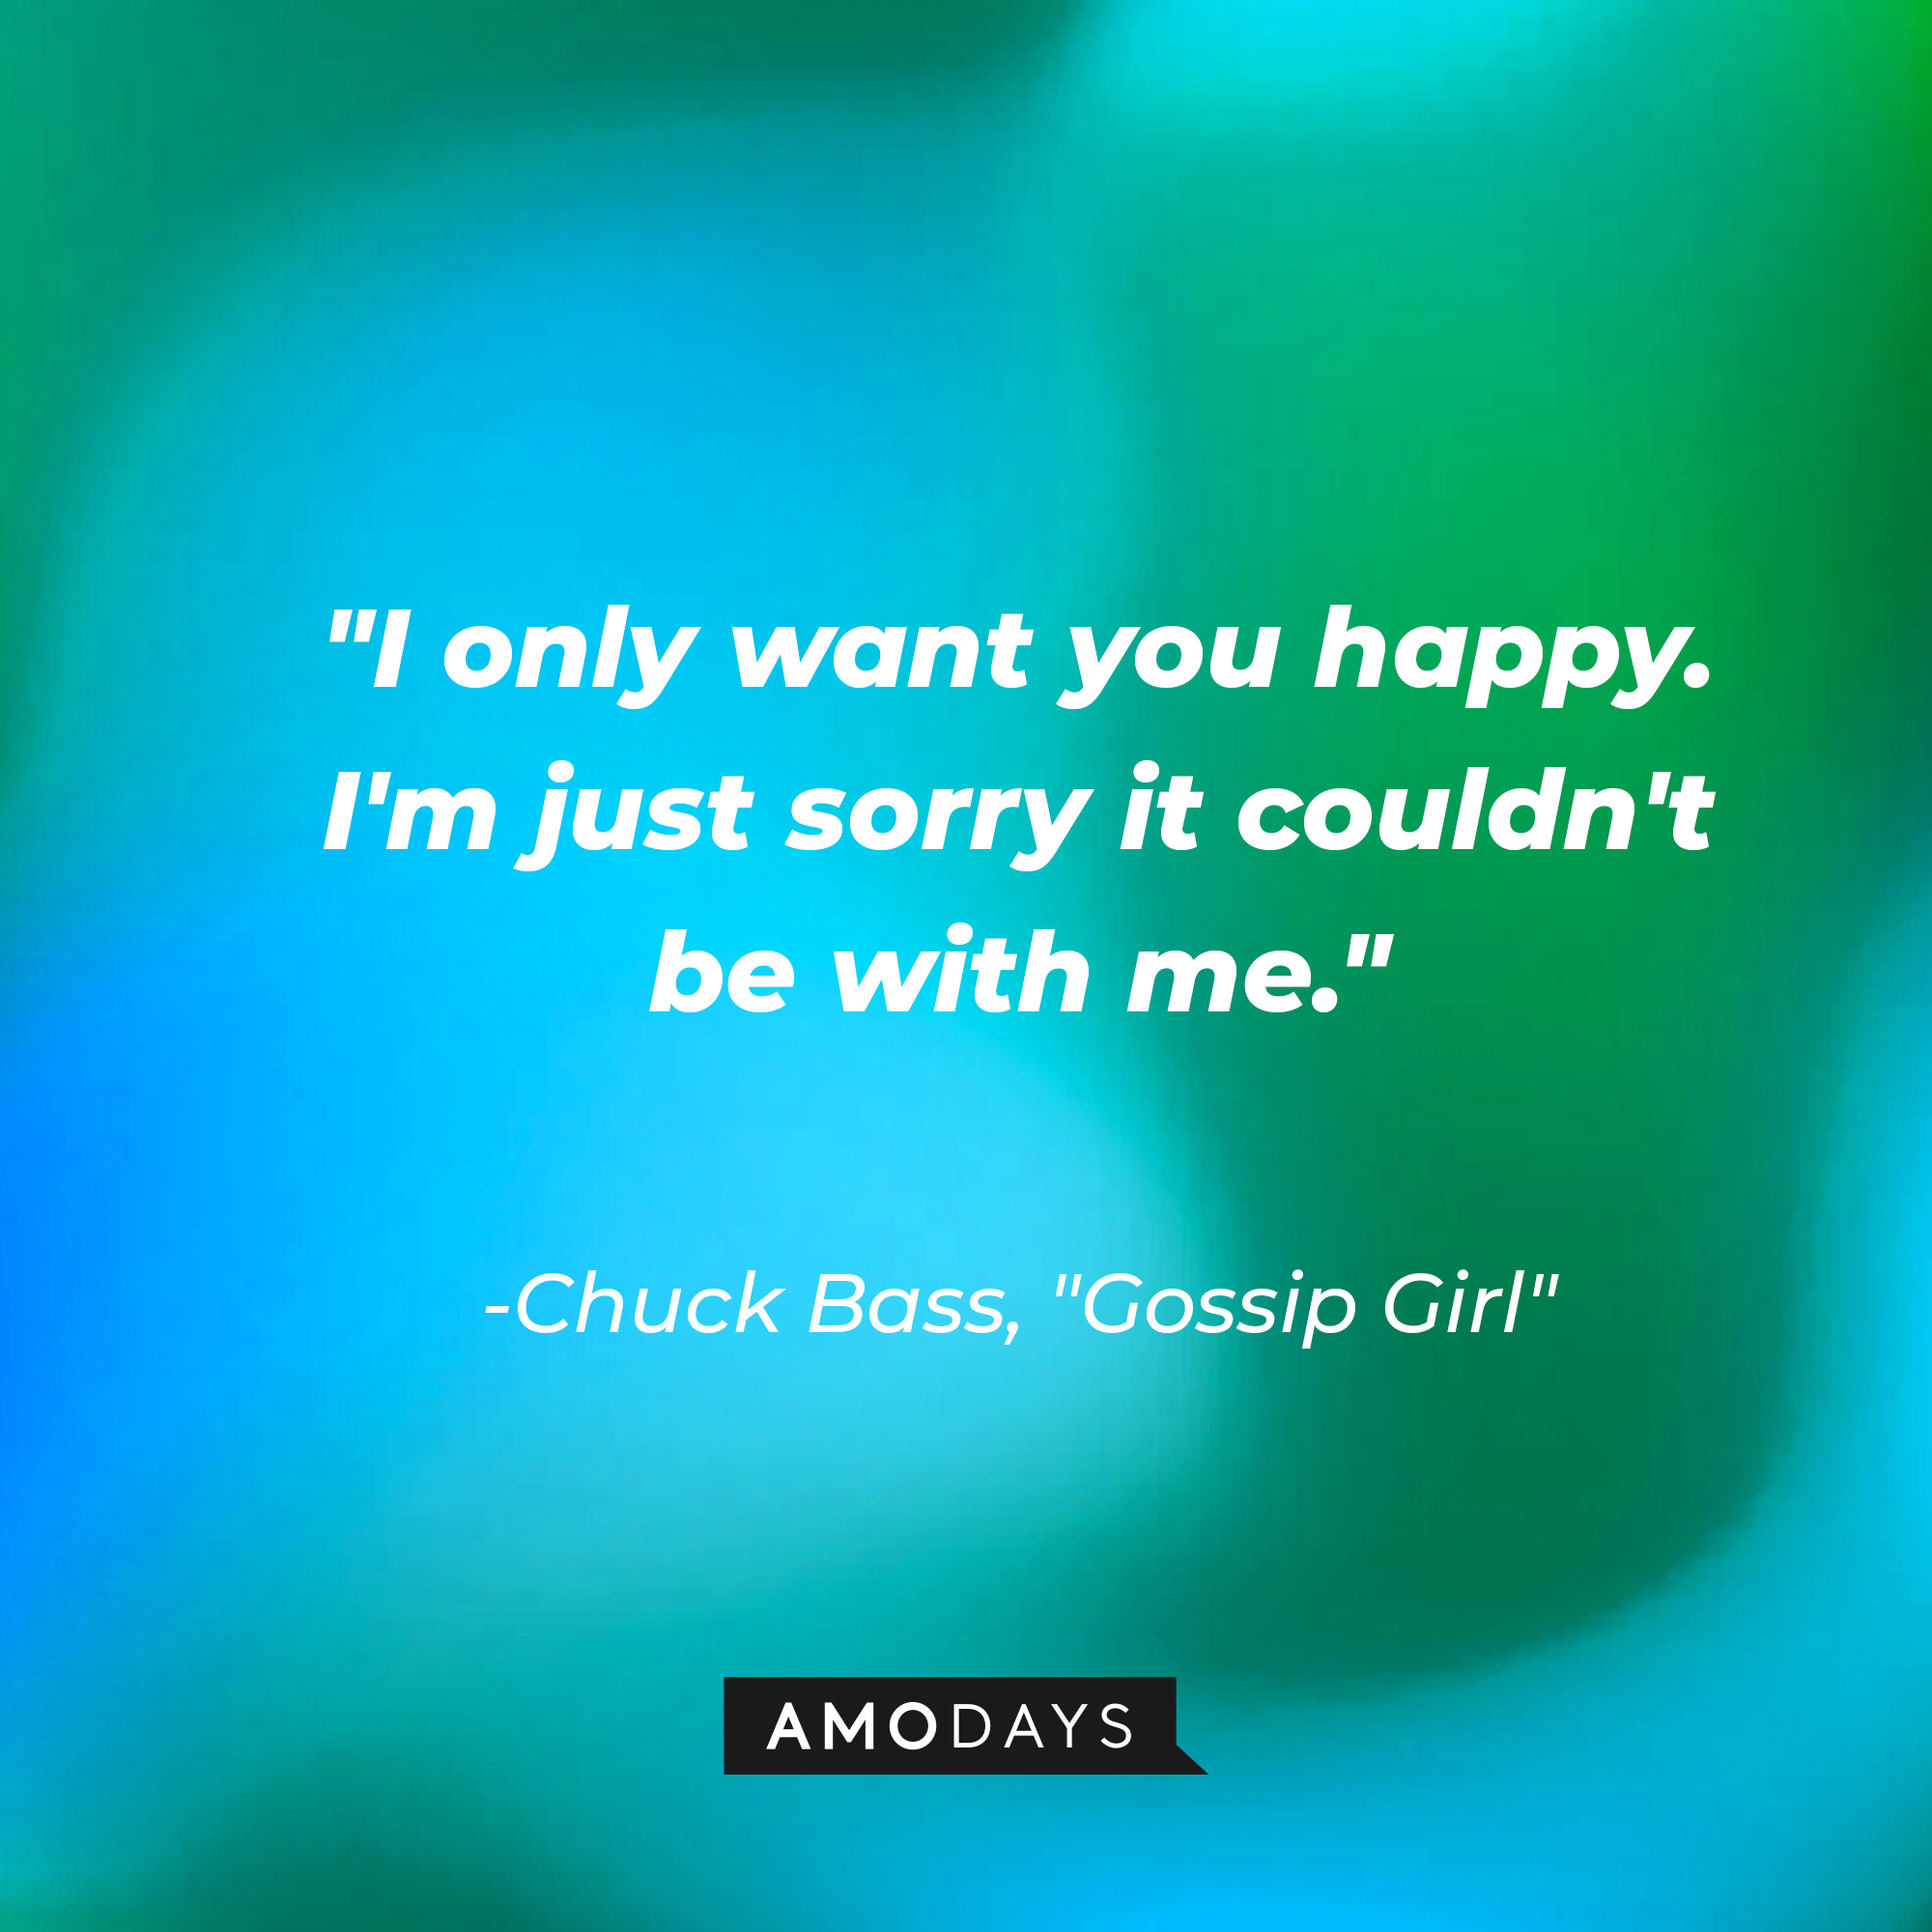 Chuck Bass' quote: "I only want you happy. I'm just sorry it couldn't be with me." | Source: AmoDays